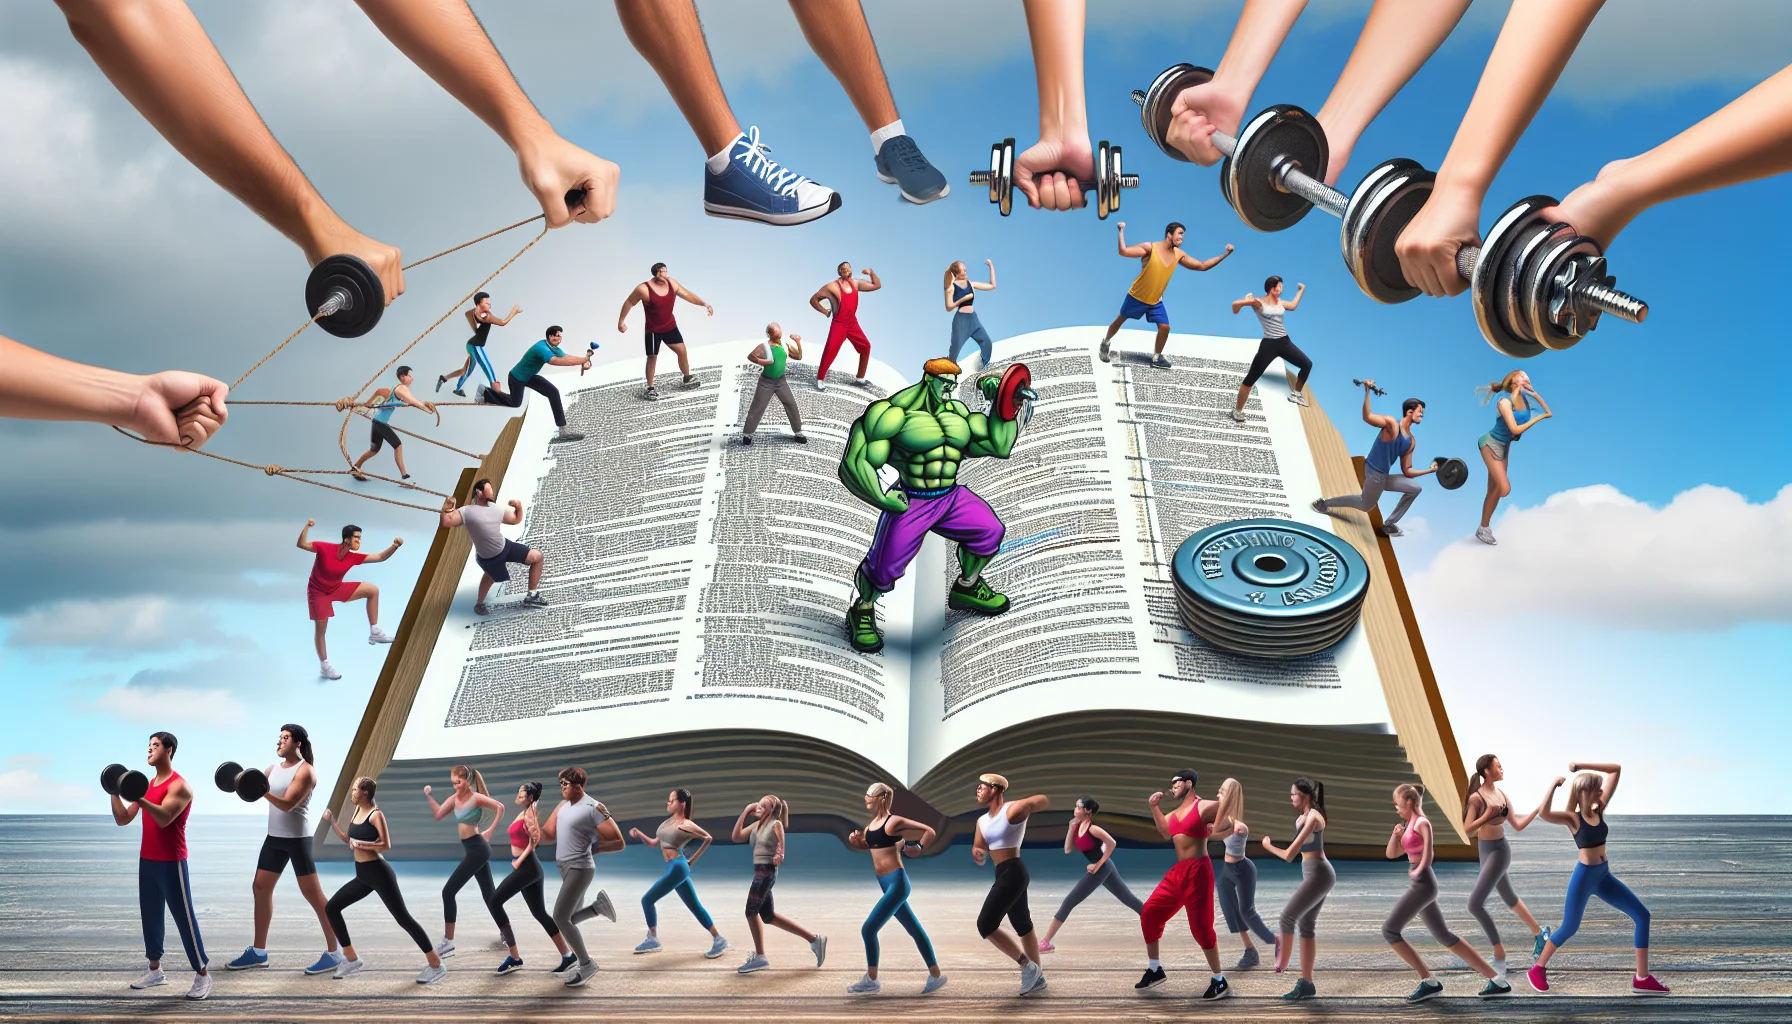 Depict an amusing scenario showing a guide to choosing the perfect weight loss program for fitness enthusiasts. The scene could feature a humorously large fitness instruction manual in the foreground, with comically exaggerated fonts and diagrams. In the background, a variety of individuals of different genders and descents are shown engaging in a range of exercises, like jogging, weightlifting, and yoga, with comical expressions of enthusiasm and determination on their faces. Through the hilarity of the scene, the desire for exercise and fitness is subtly encouraged.